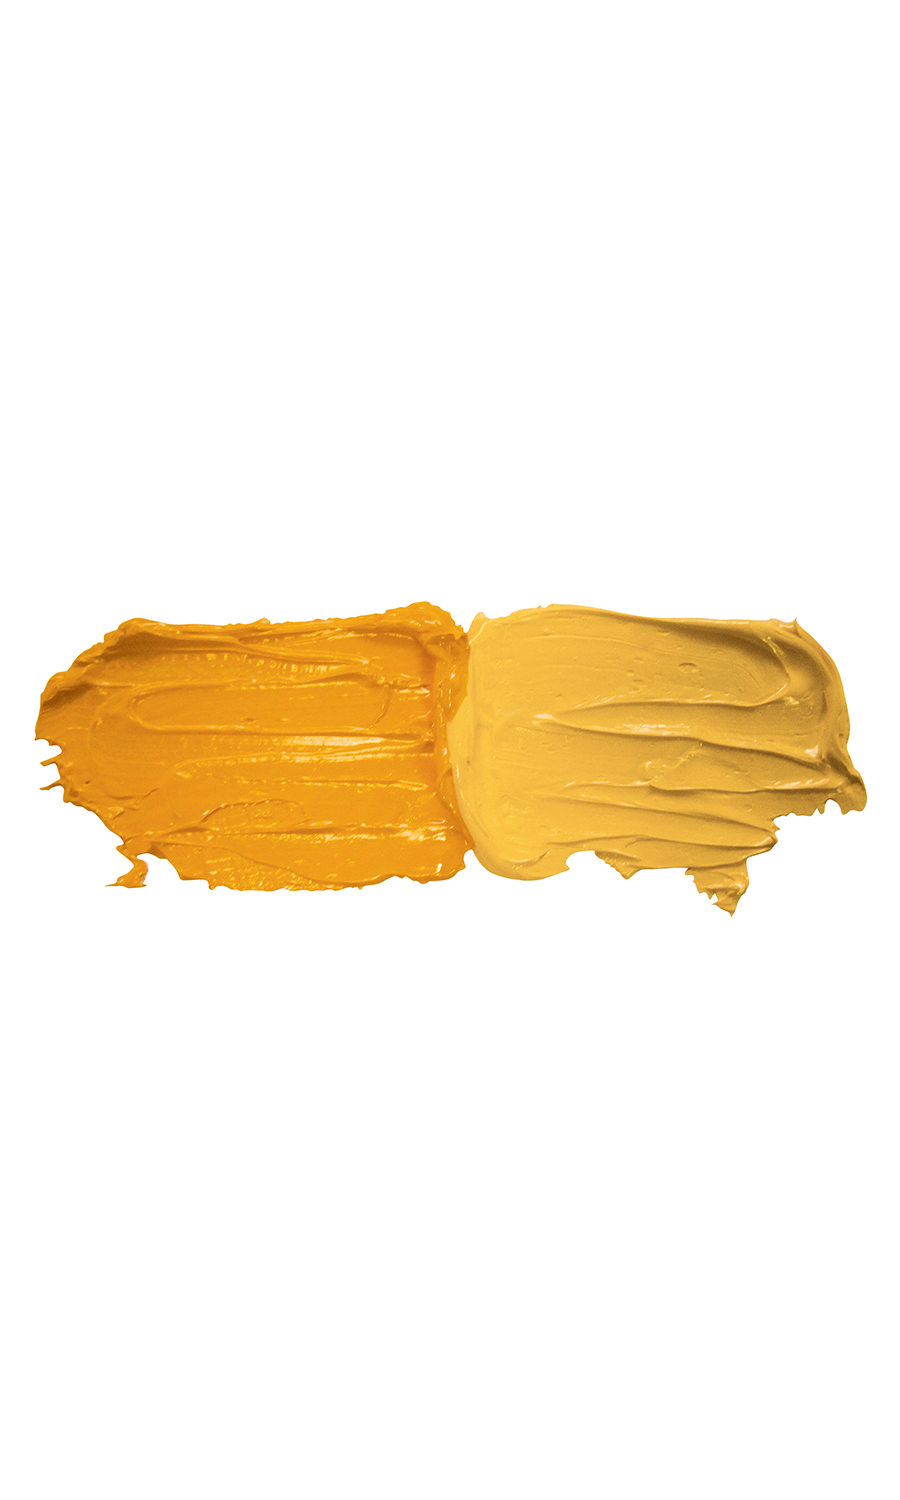 MAX® Water Mixable Oil Yellow Color Family